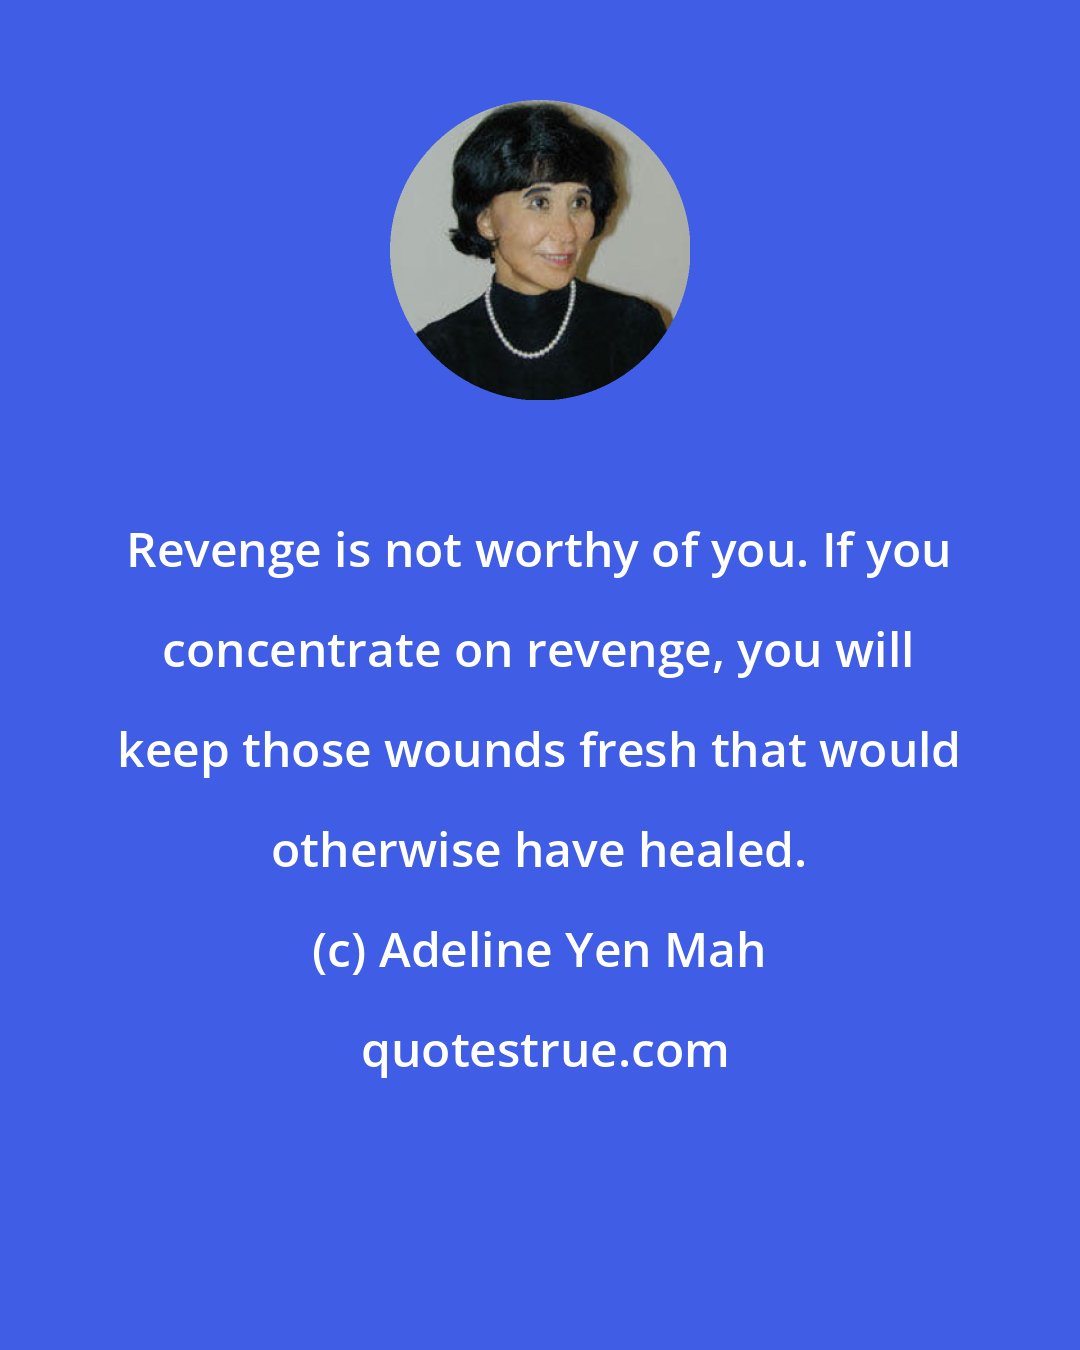 Adeline Yen Mah: Revenge is not worthy of you. If you concentrate on revenge, you will keep those wounds fresh that would otherwise have healed.